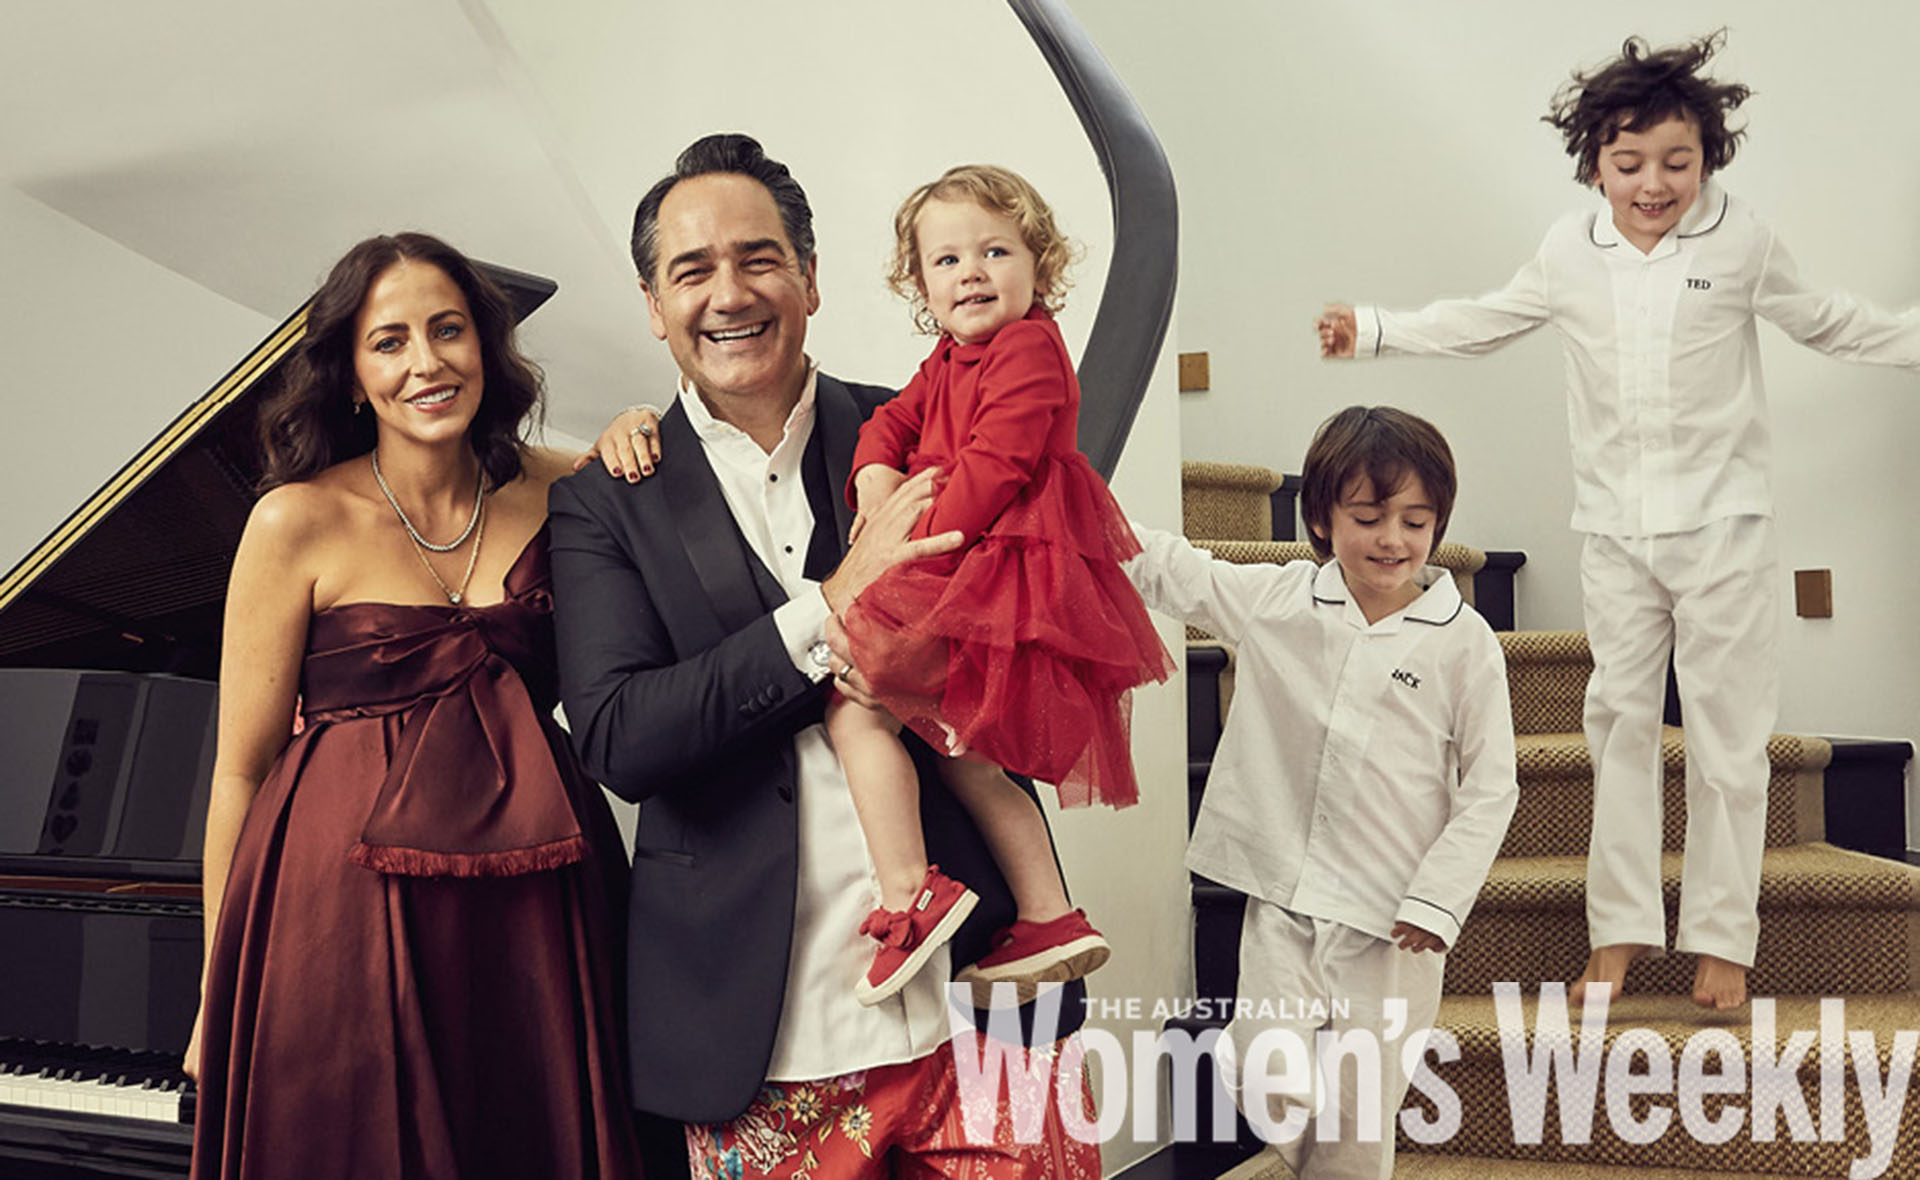 EXCLUSIVE: Michael ‘Wippa’ Wipfli reveals the one gift “you can’t pay for” as Christmas approaches with three kids